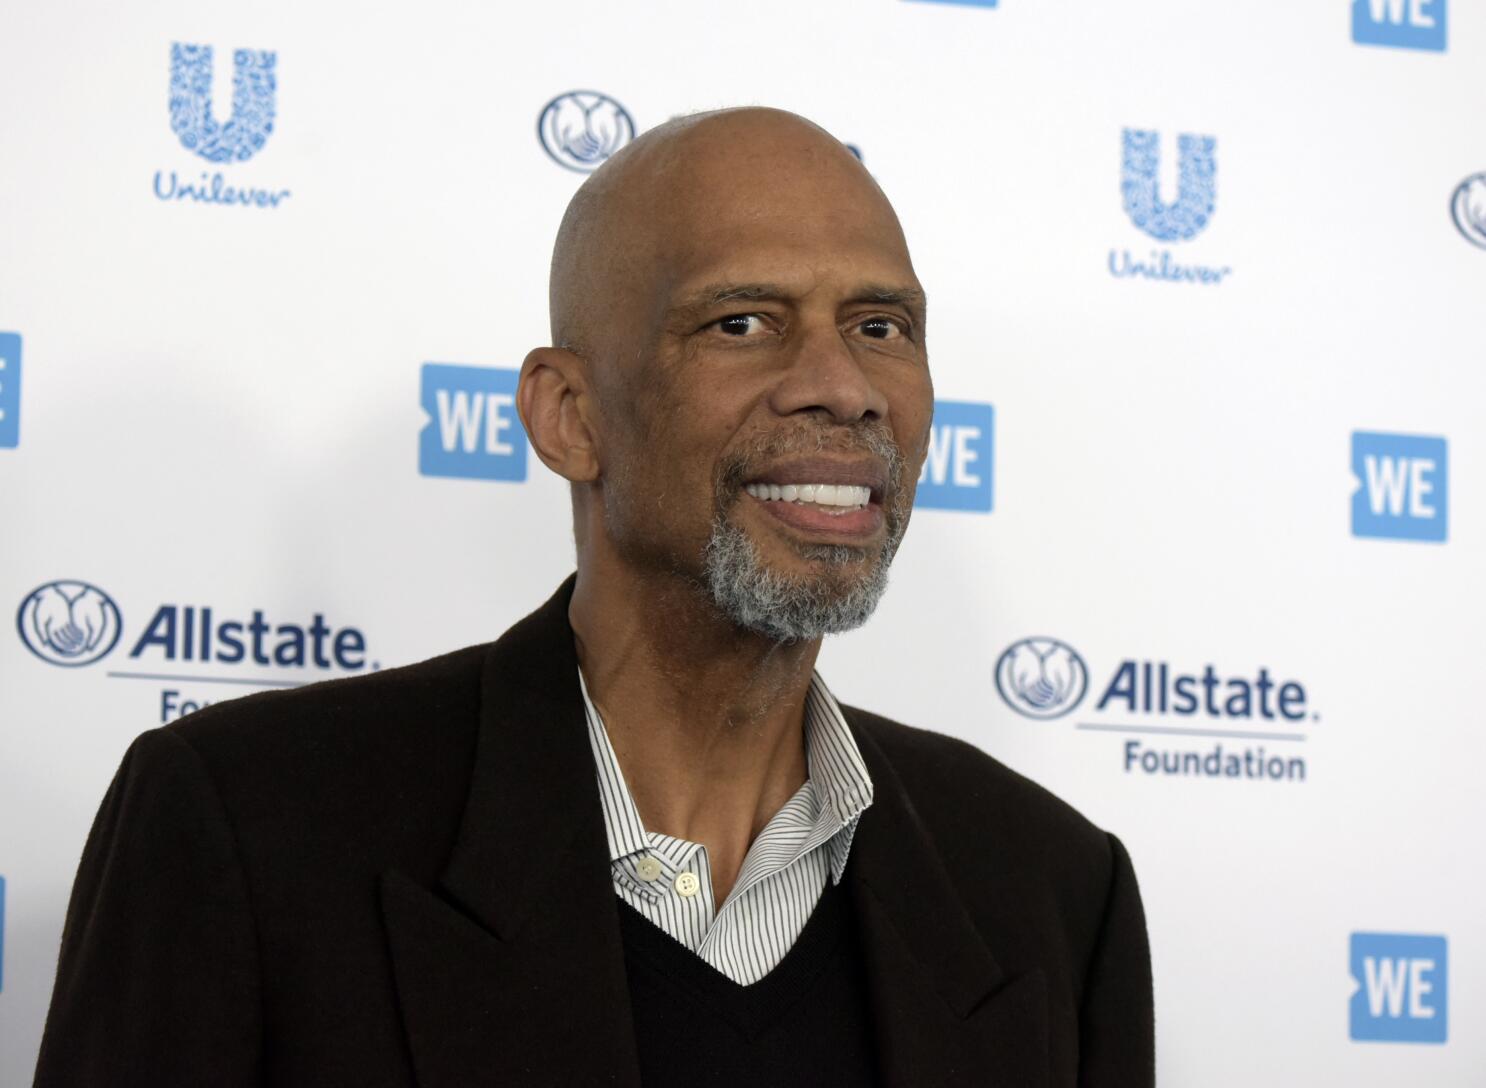 Kareem Abdul-Jabbar Issues Apology to LeBron James After Criticizing Him  for Behavior That's 'Beneath Him' (UPDATE)